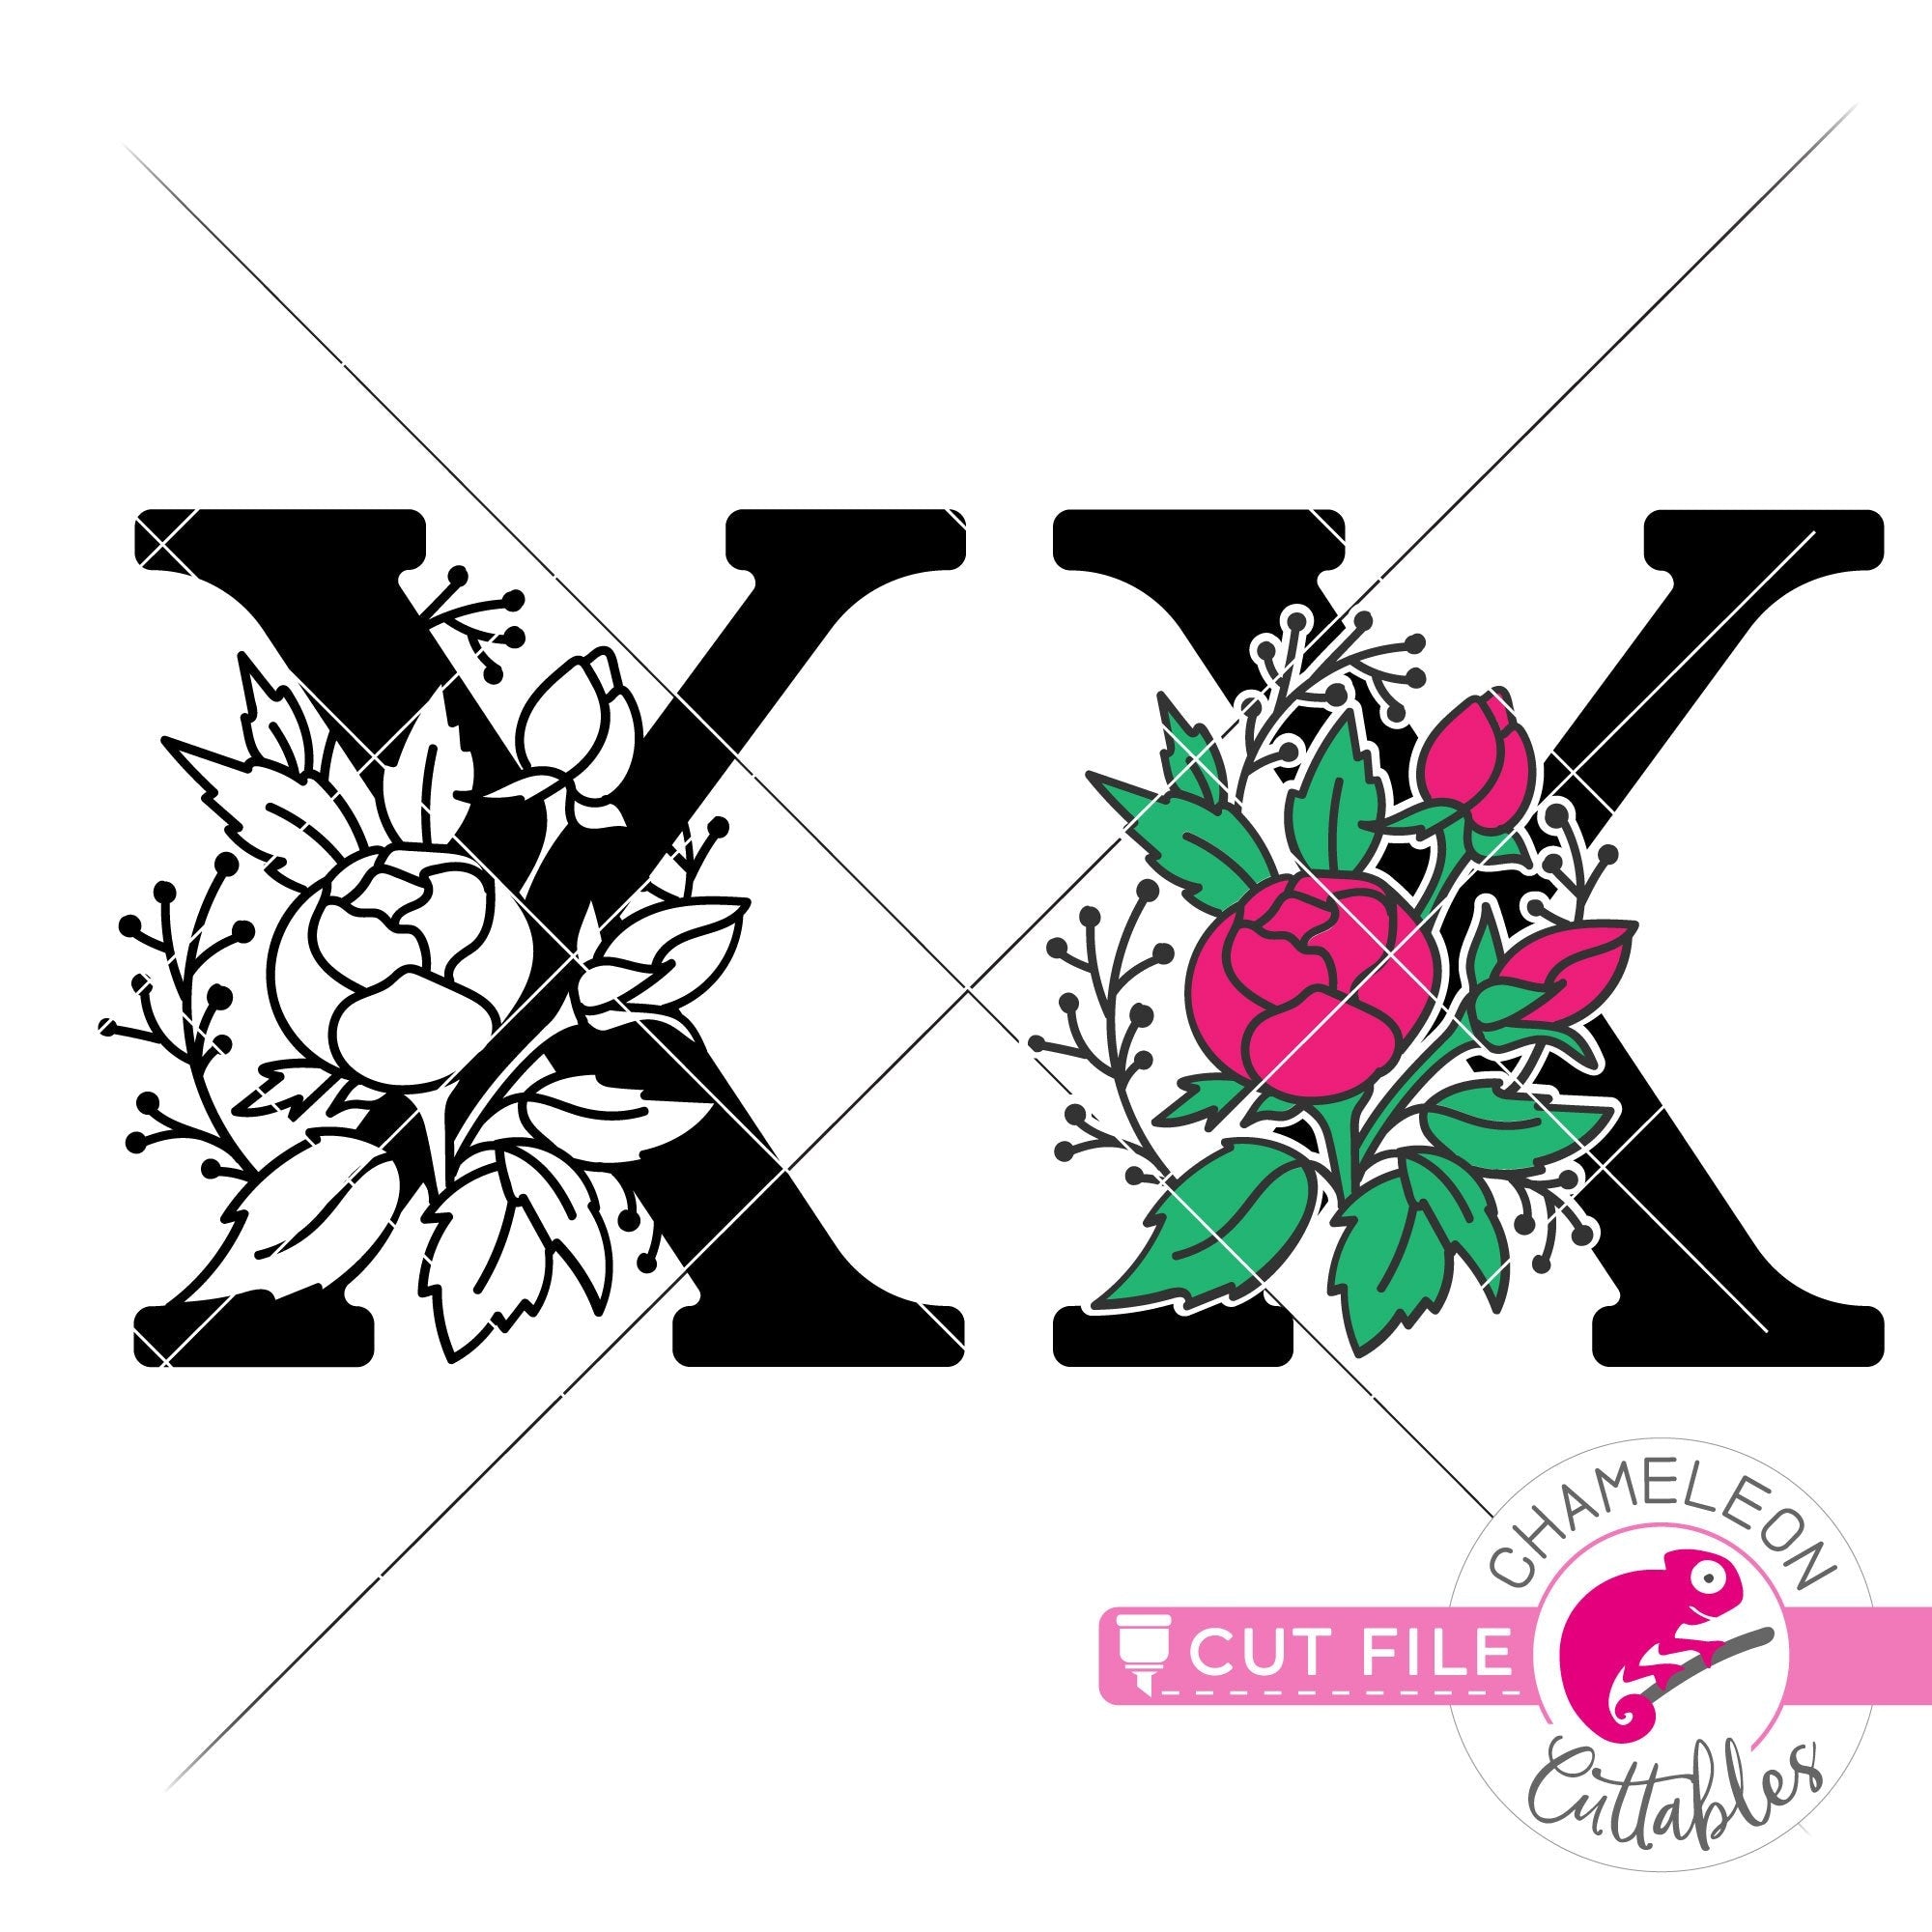 Louis Vuitton Logo SVG, DXF, EPS, PNG, Cut Files For Silhouette And Cricut